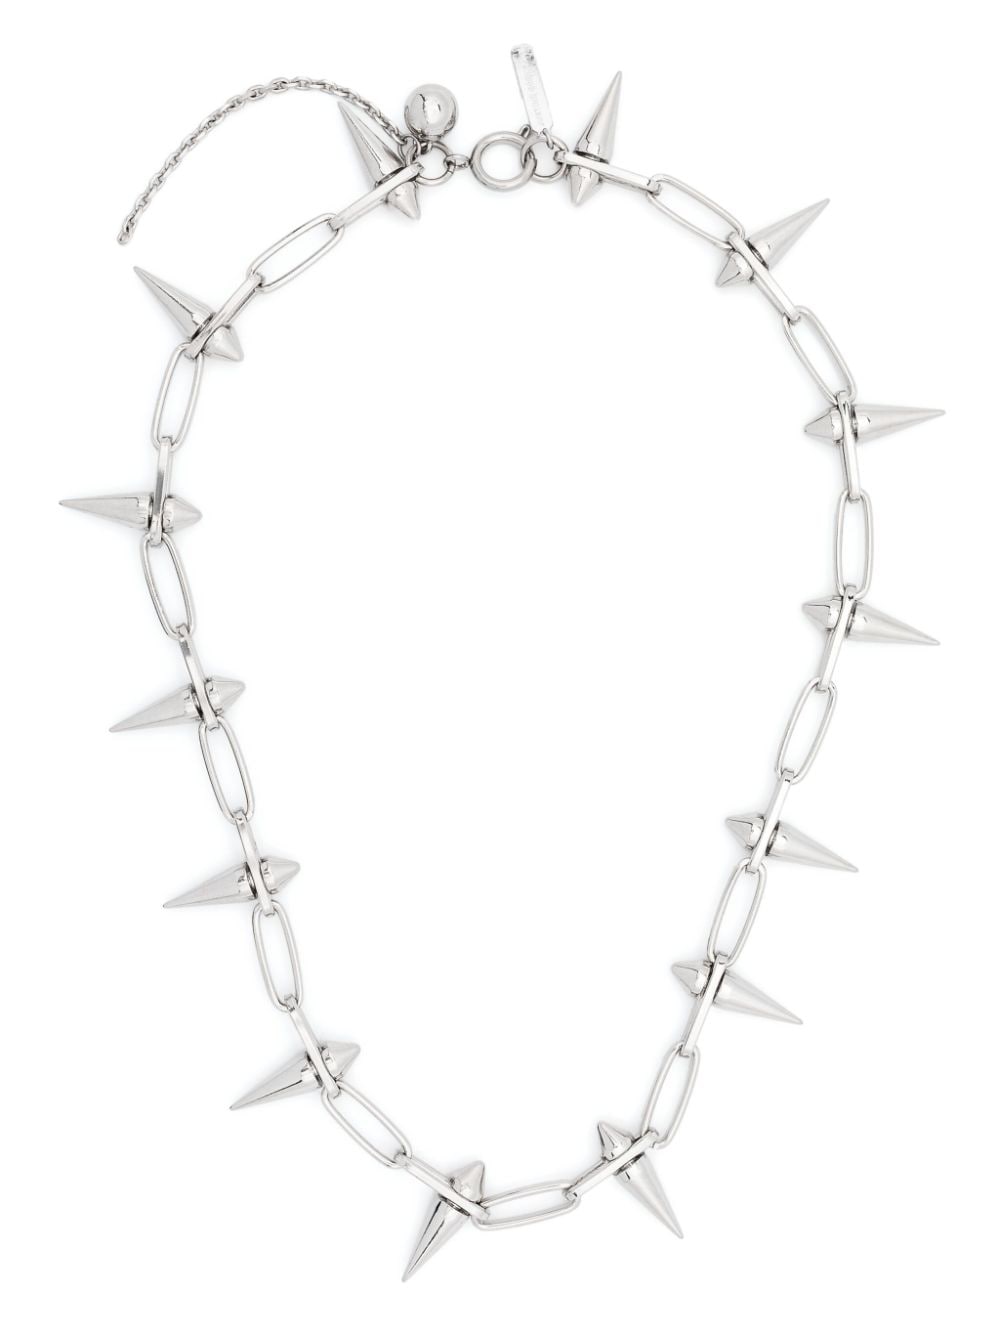 James spiked-chain necklace